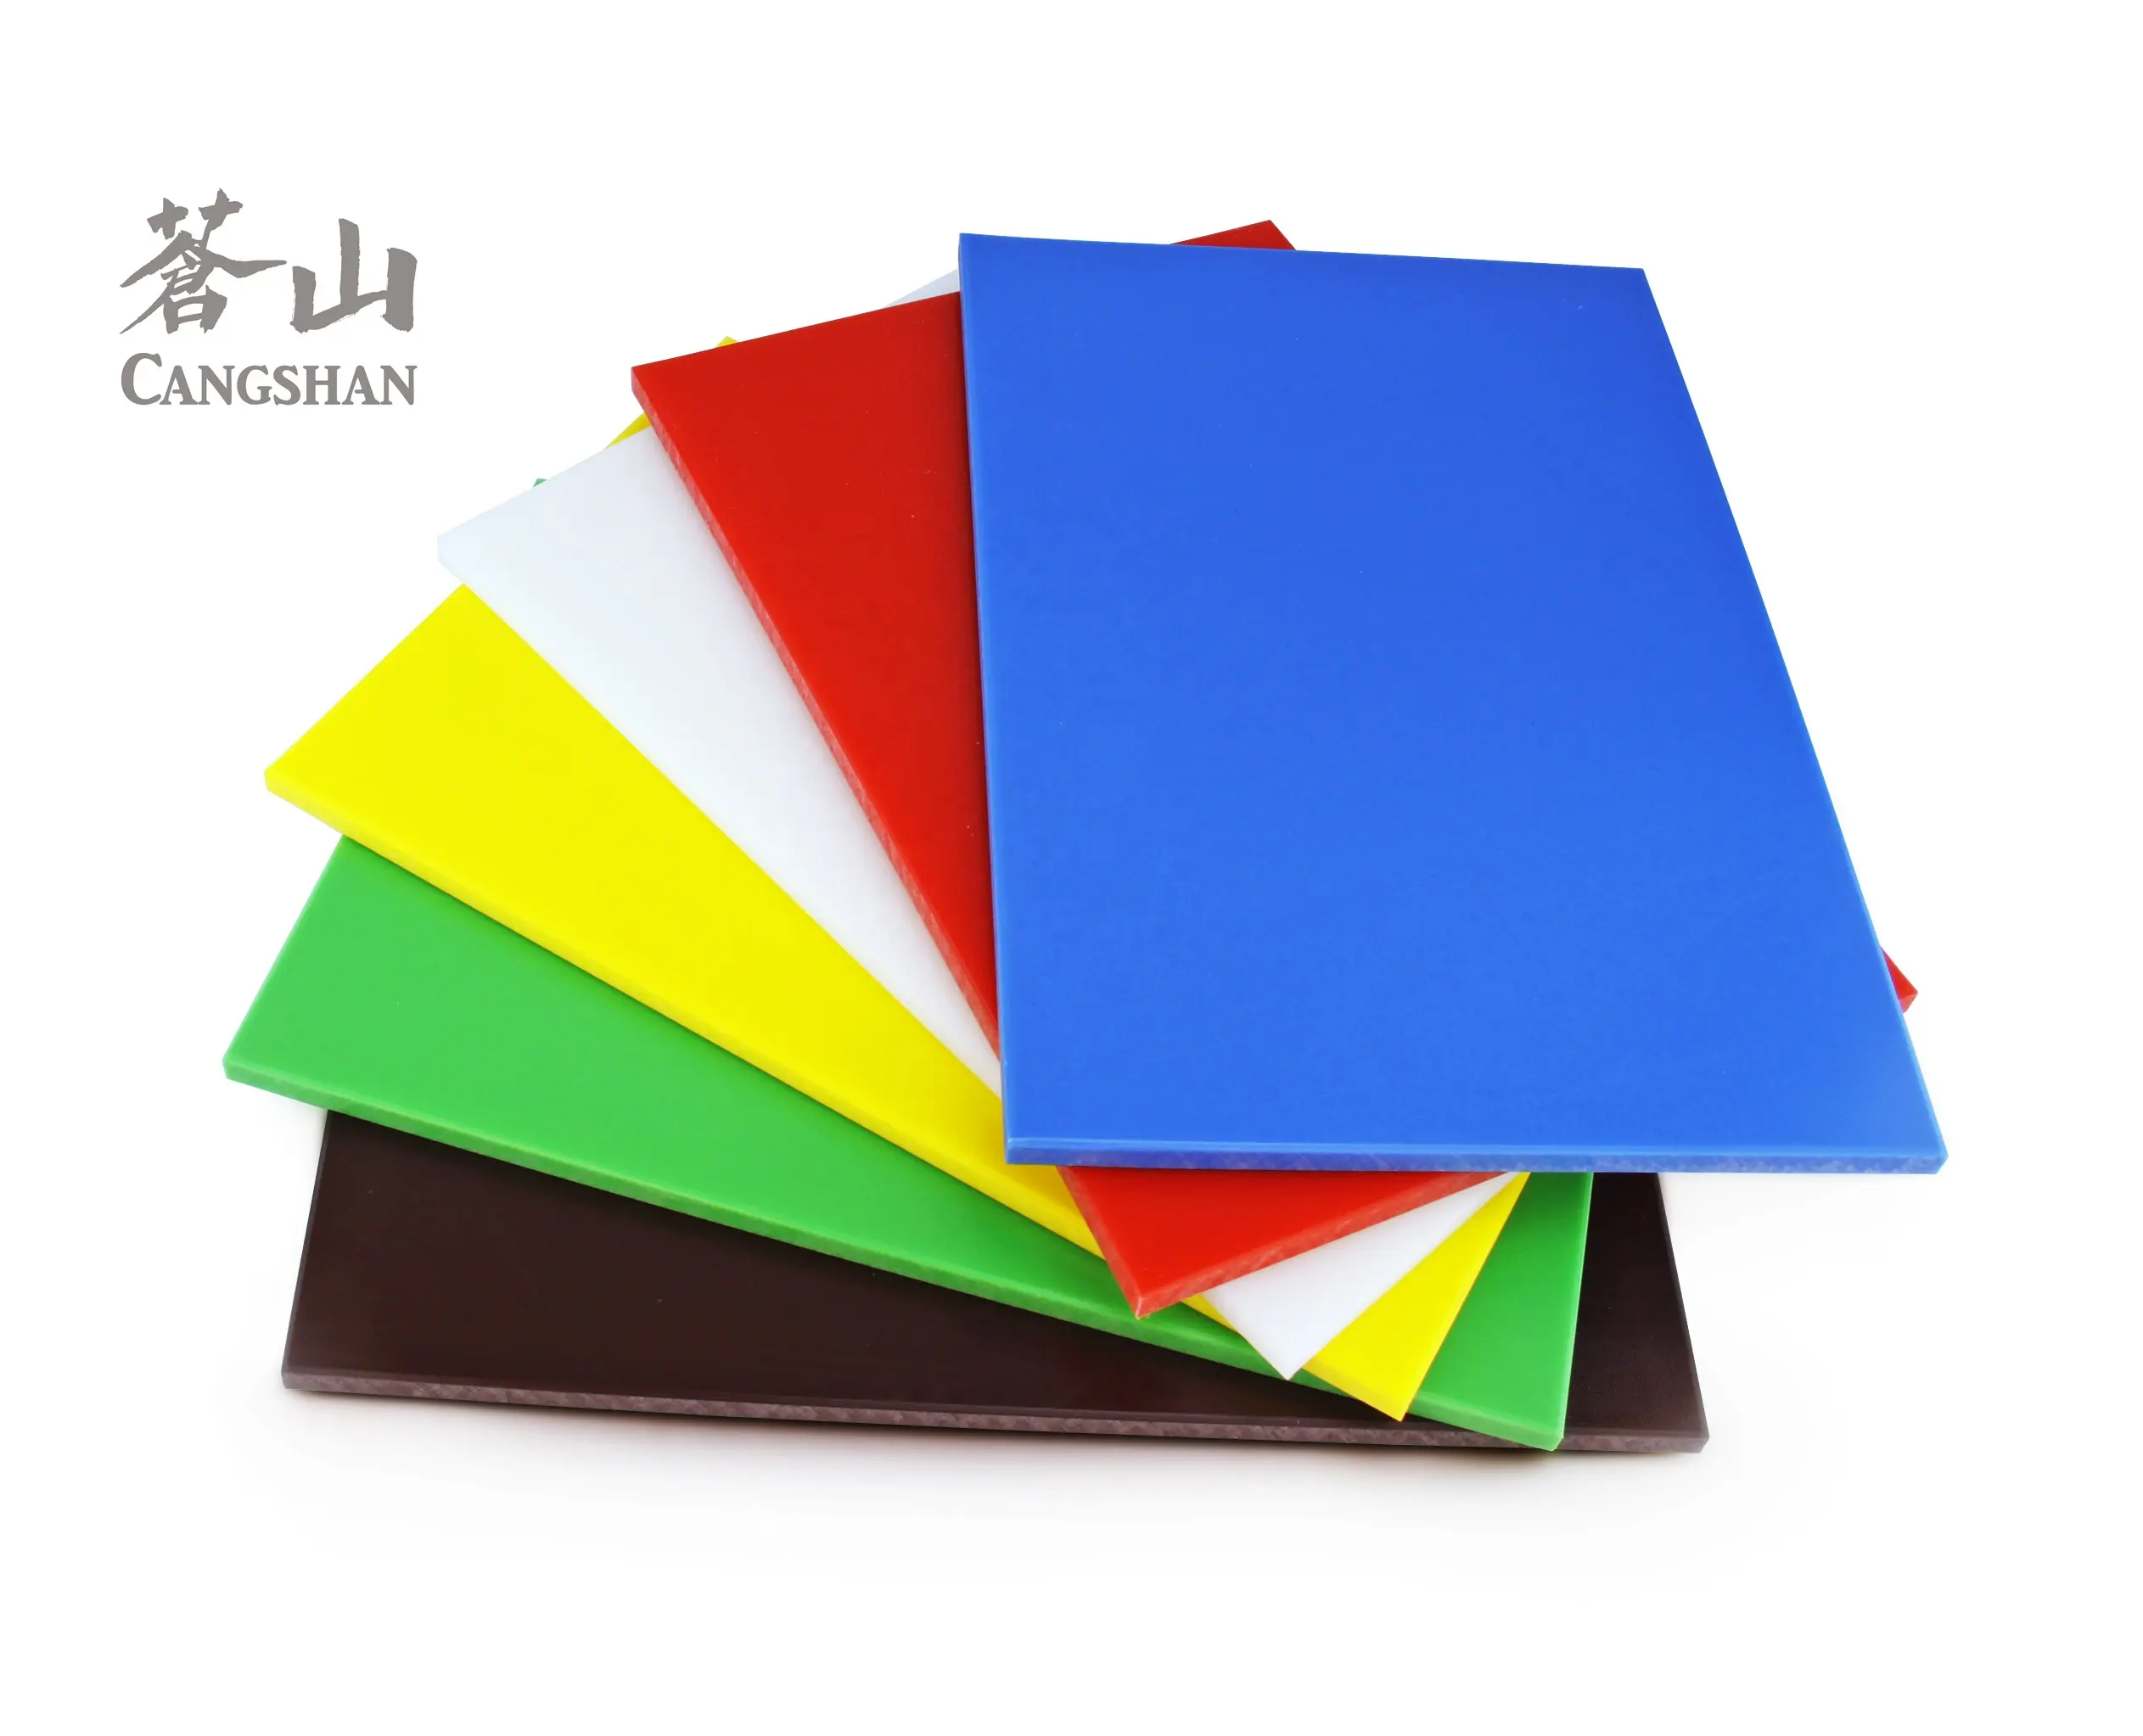 Cangshan - Henry Foodservice Heavy-Duty Plastic Cutting Board, Color Coded Plastic Chopping Board, Dishwasher Safe